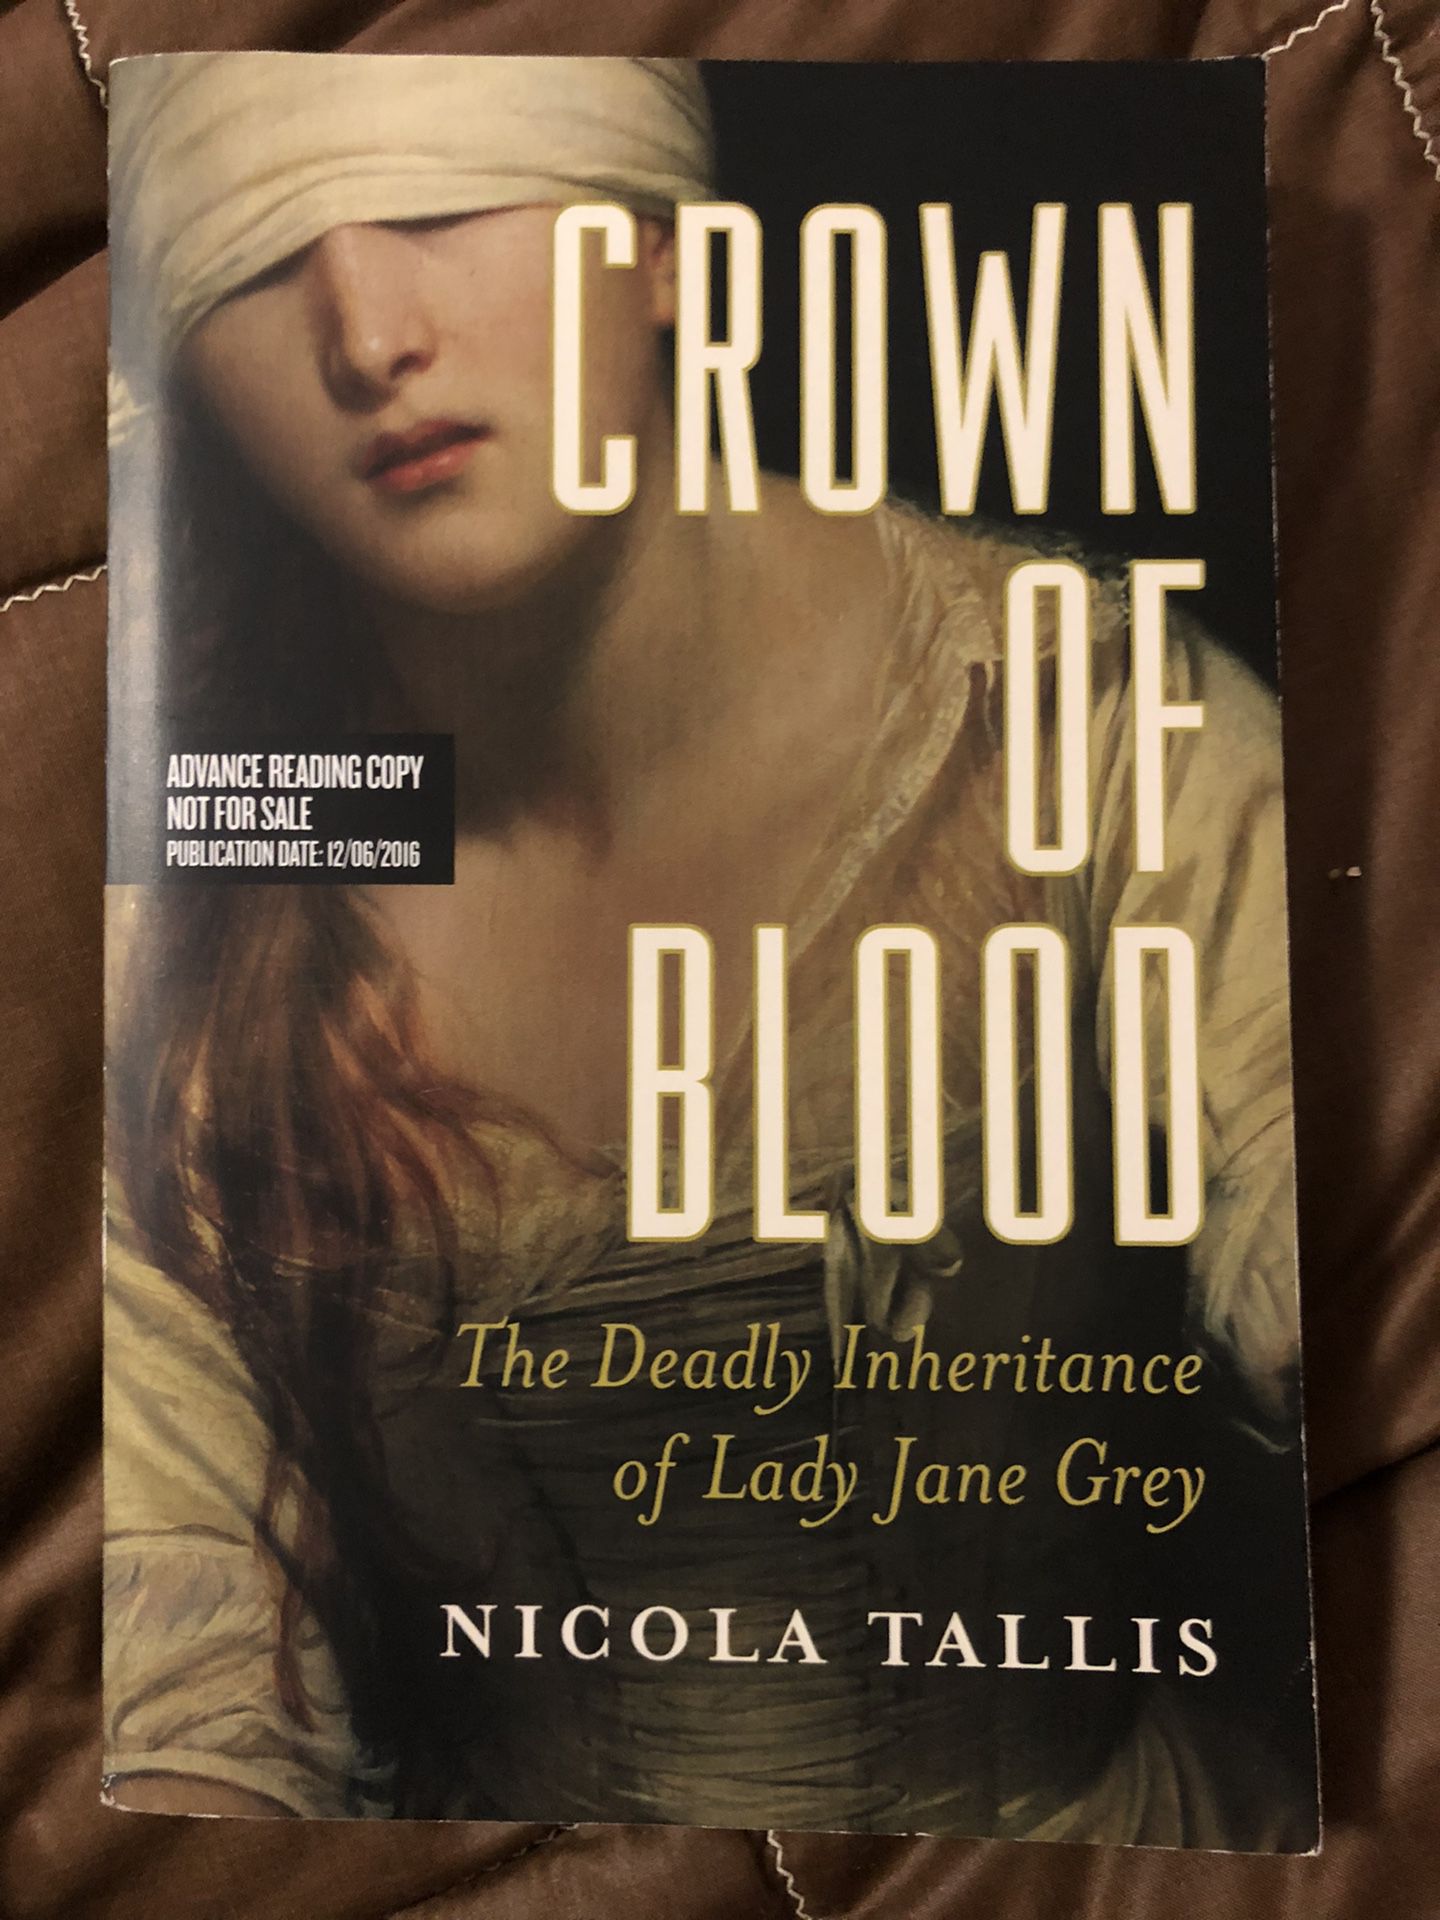 Crown of Blood: The Deadly Inheritance of Lady Jane Grey by Nicola Tallis (paperback)